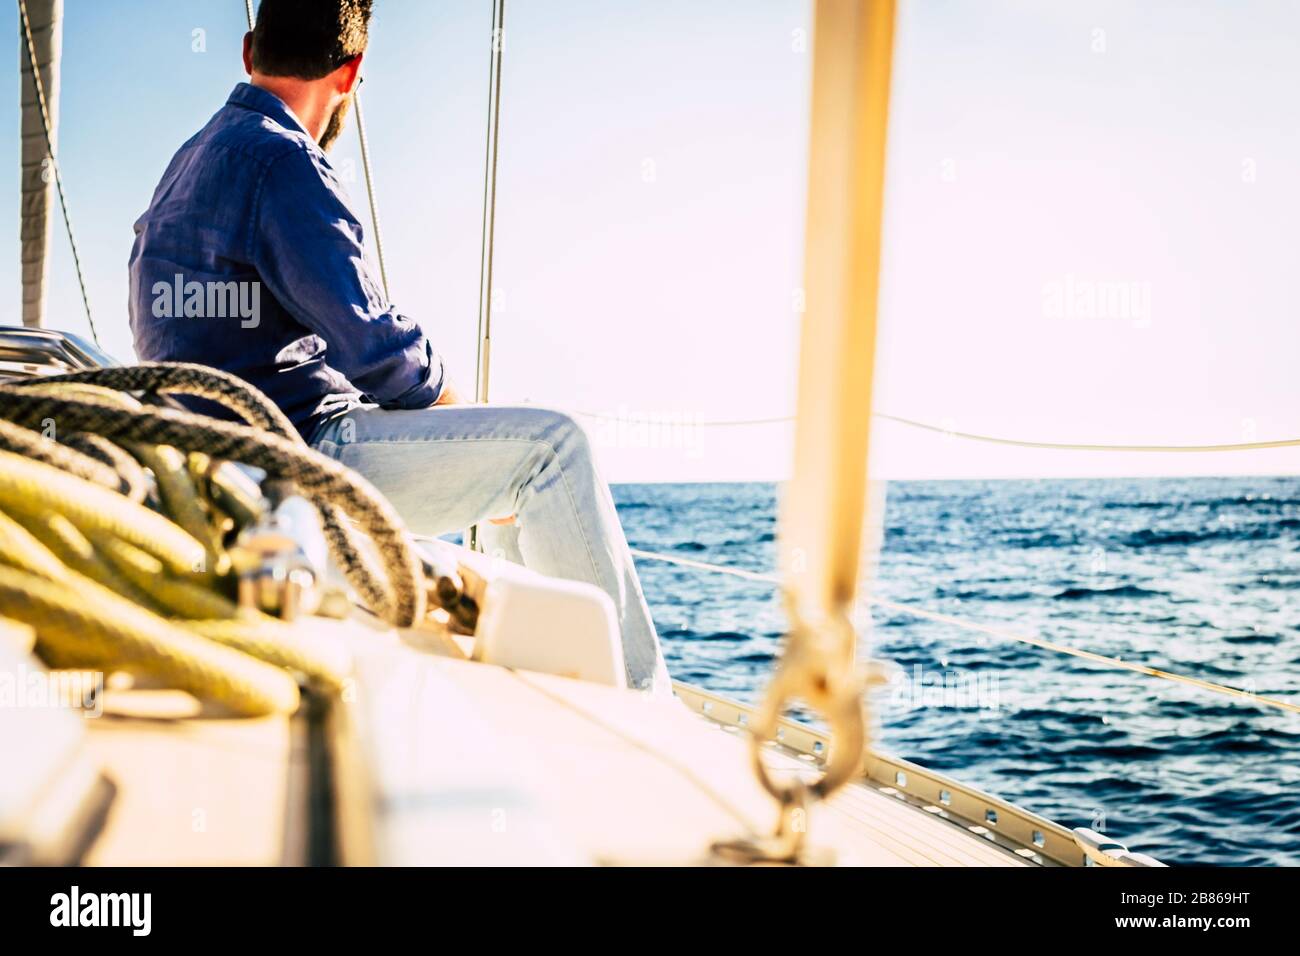 Man sit on a sail boat travel the ocean and enjoy freedom lifestyle - concept of sailing and having fun during summer holiday vacation in alternative Stock Photo